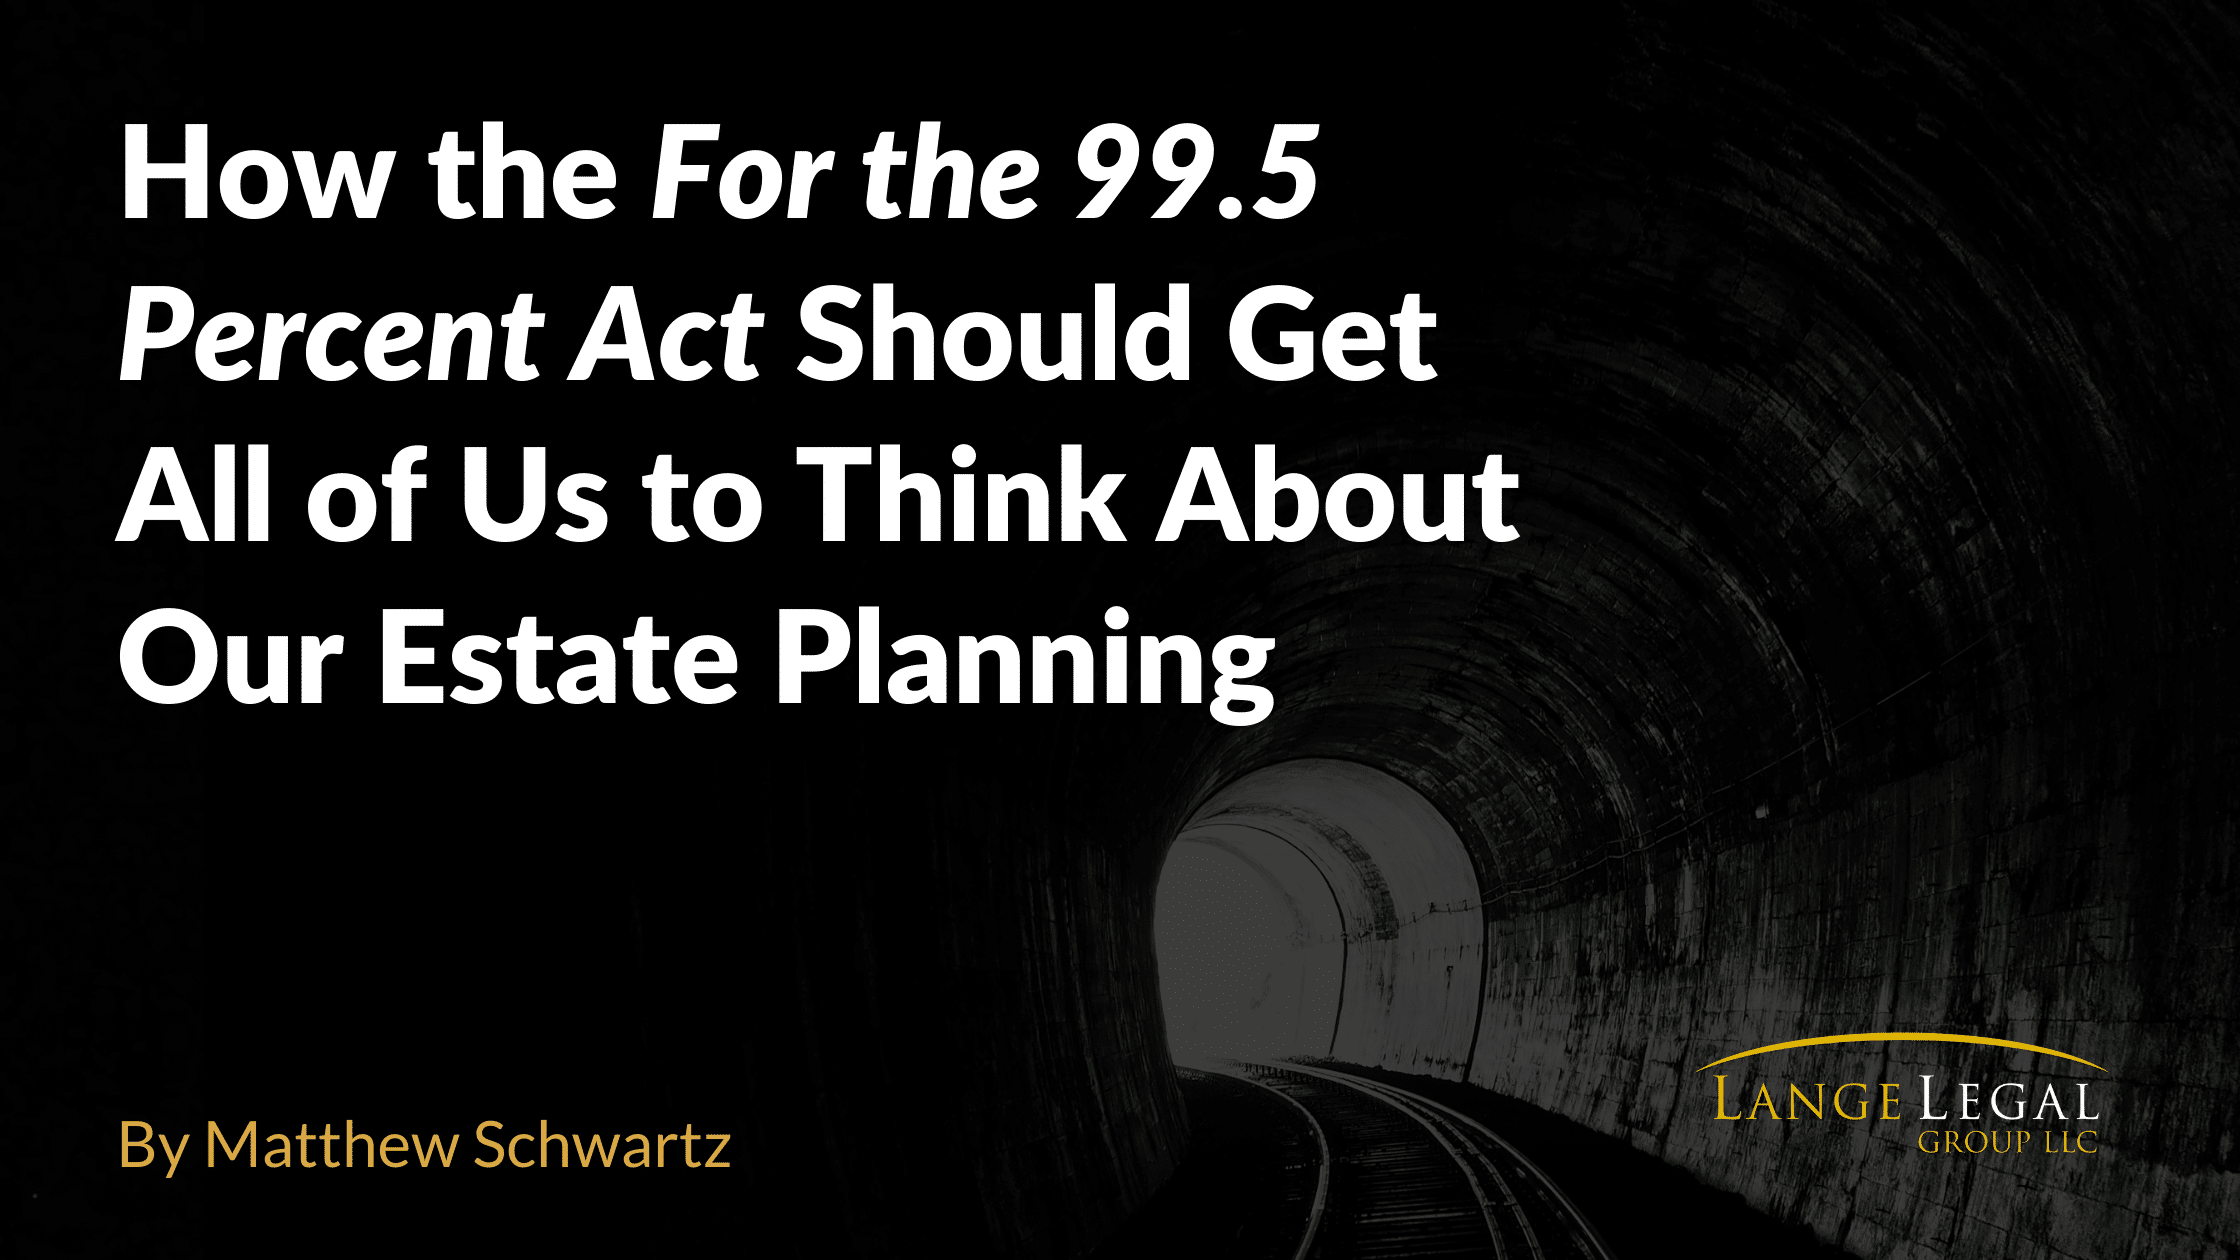 Blog Post 'How the For the 99.5 Percent Act Should Get All of Us to Think About Our Estate Planning by Matt Schwartz featured on PayTaxesLater.com